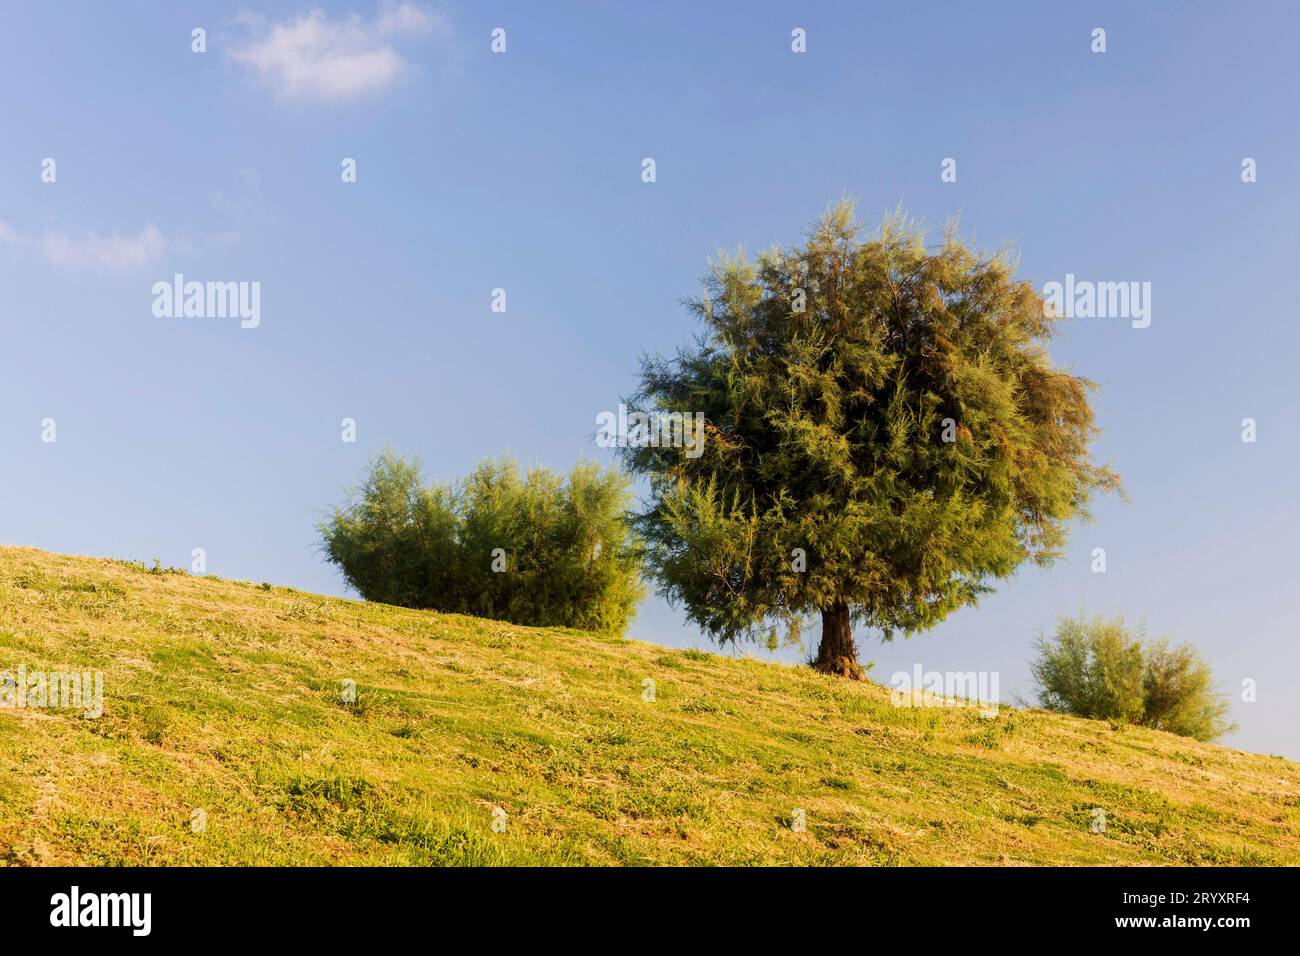 Tamarix ramosissima clipped into a ball on a hill near the Mediterranean Sea against a blue sky. Stock Photo